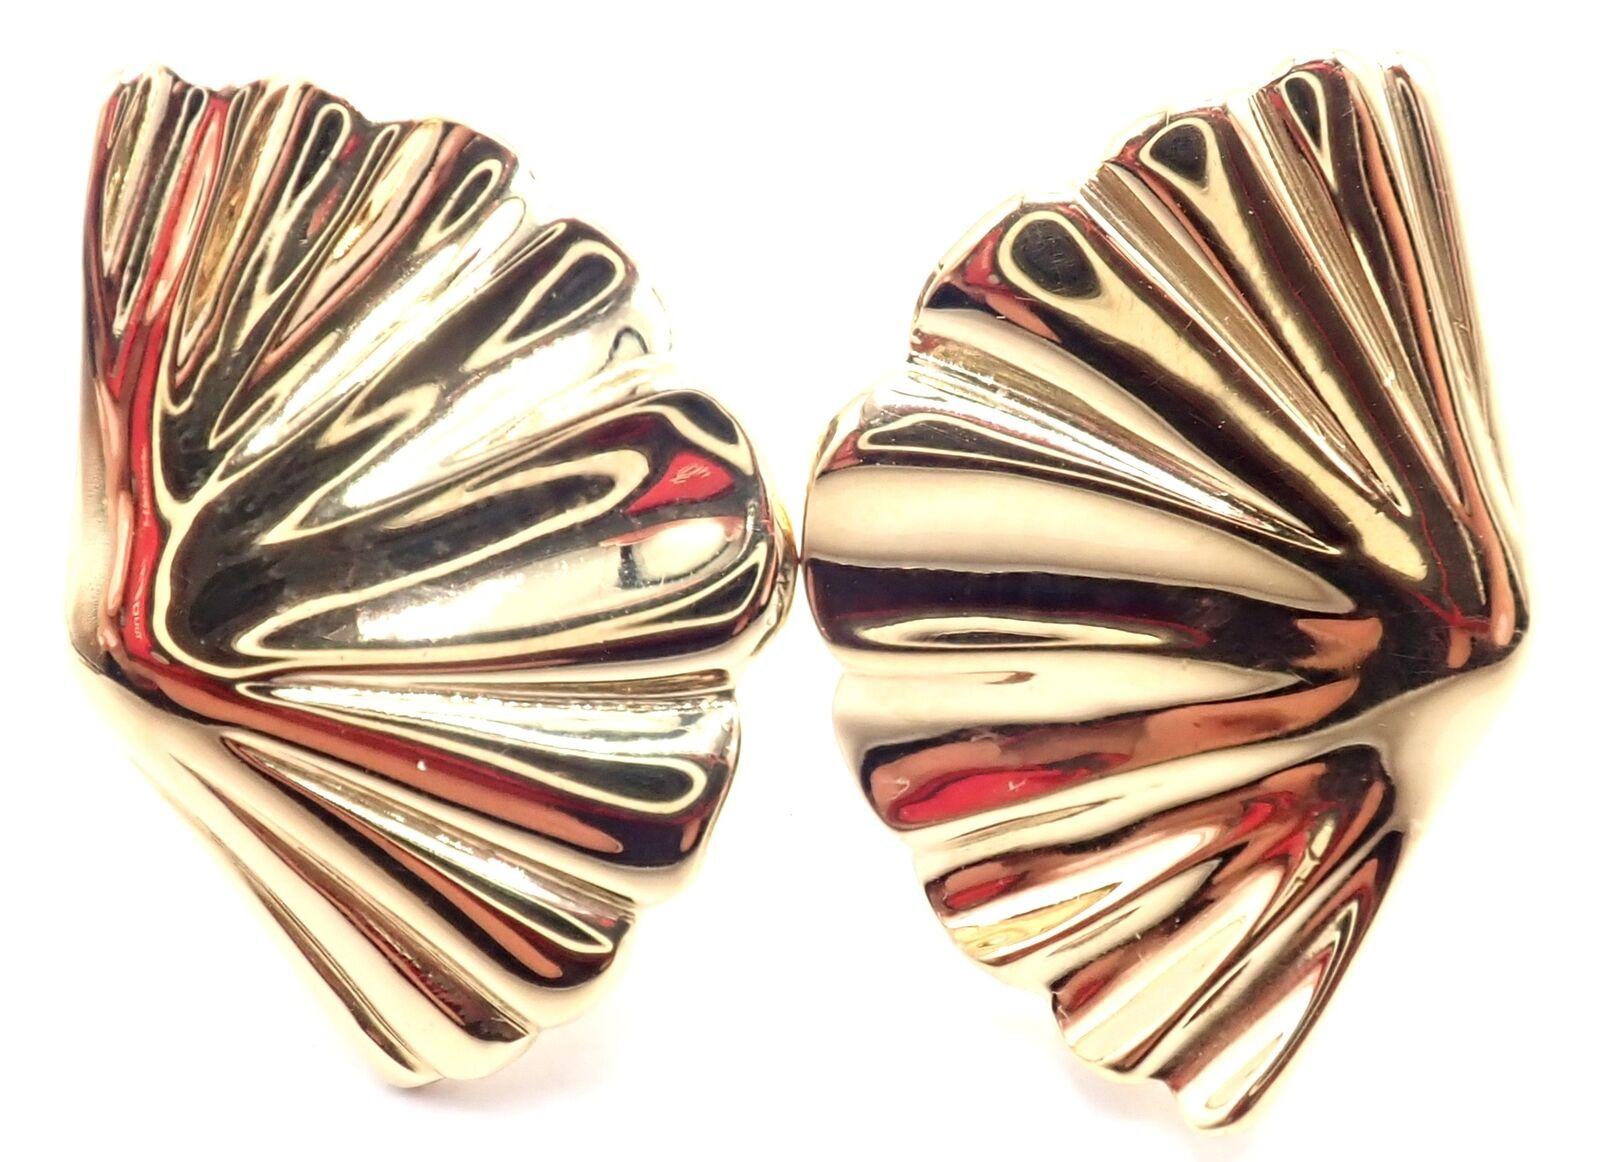 18k Yellow Gold Vintage Fan Shell Earrings by Tiffany & Co. 
These earrings are made for not pierced ears, but they can be converted for pierced ears by adding posts.
Details: 
Weight: 11.7 grams
Measurements: 26mm x 17mm
Stamped Hallmarks: T&Co 18k